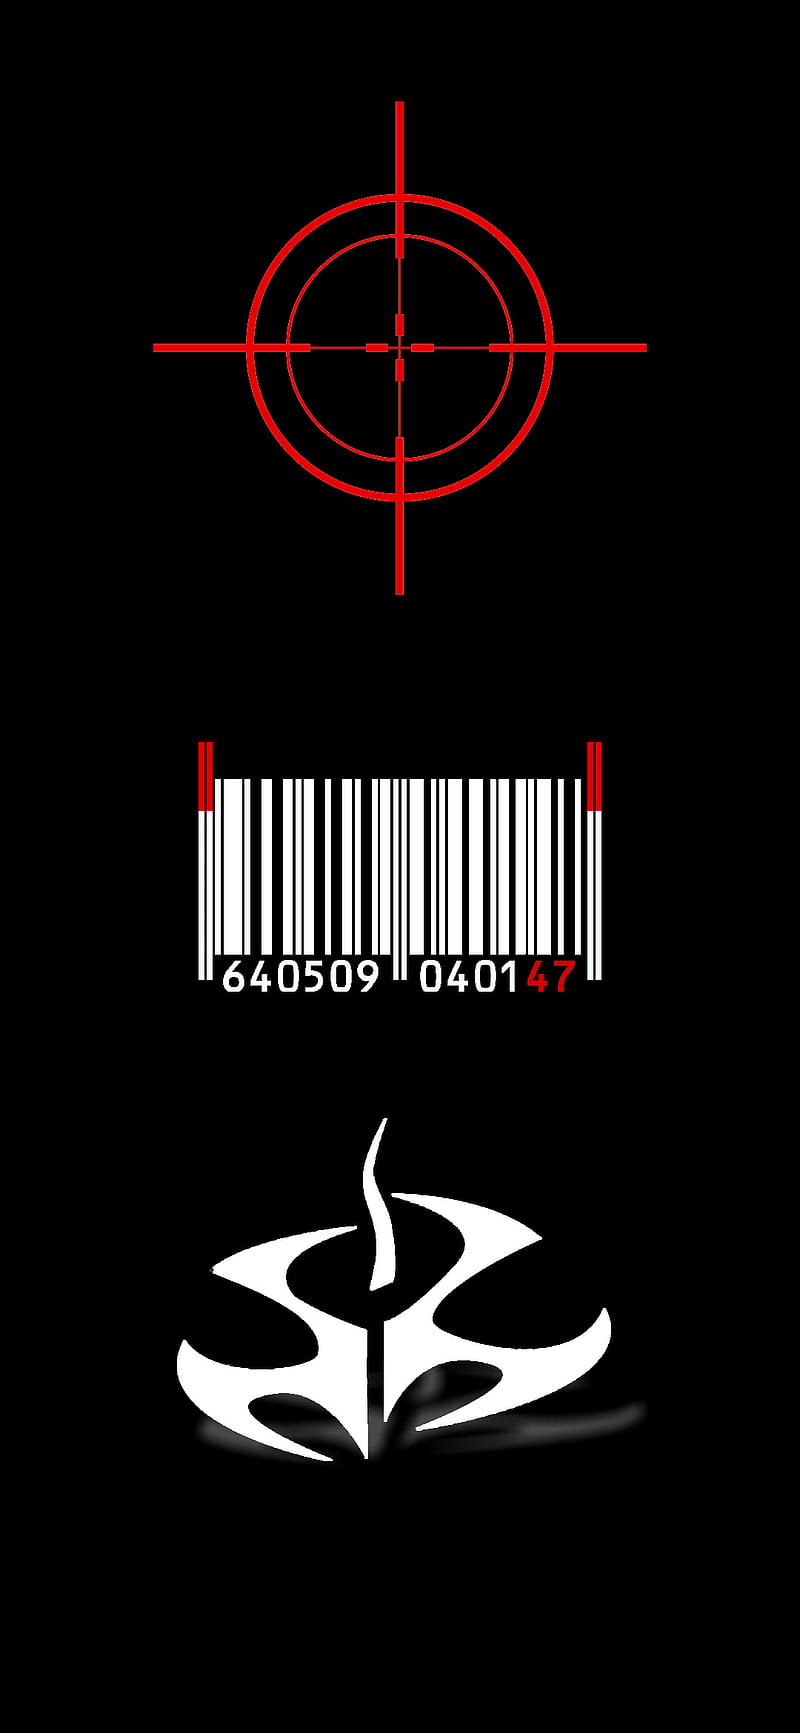 Barcode  Iphone wallpaper hipster Simple wallpapers Funny iphone  wallpaper